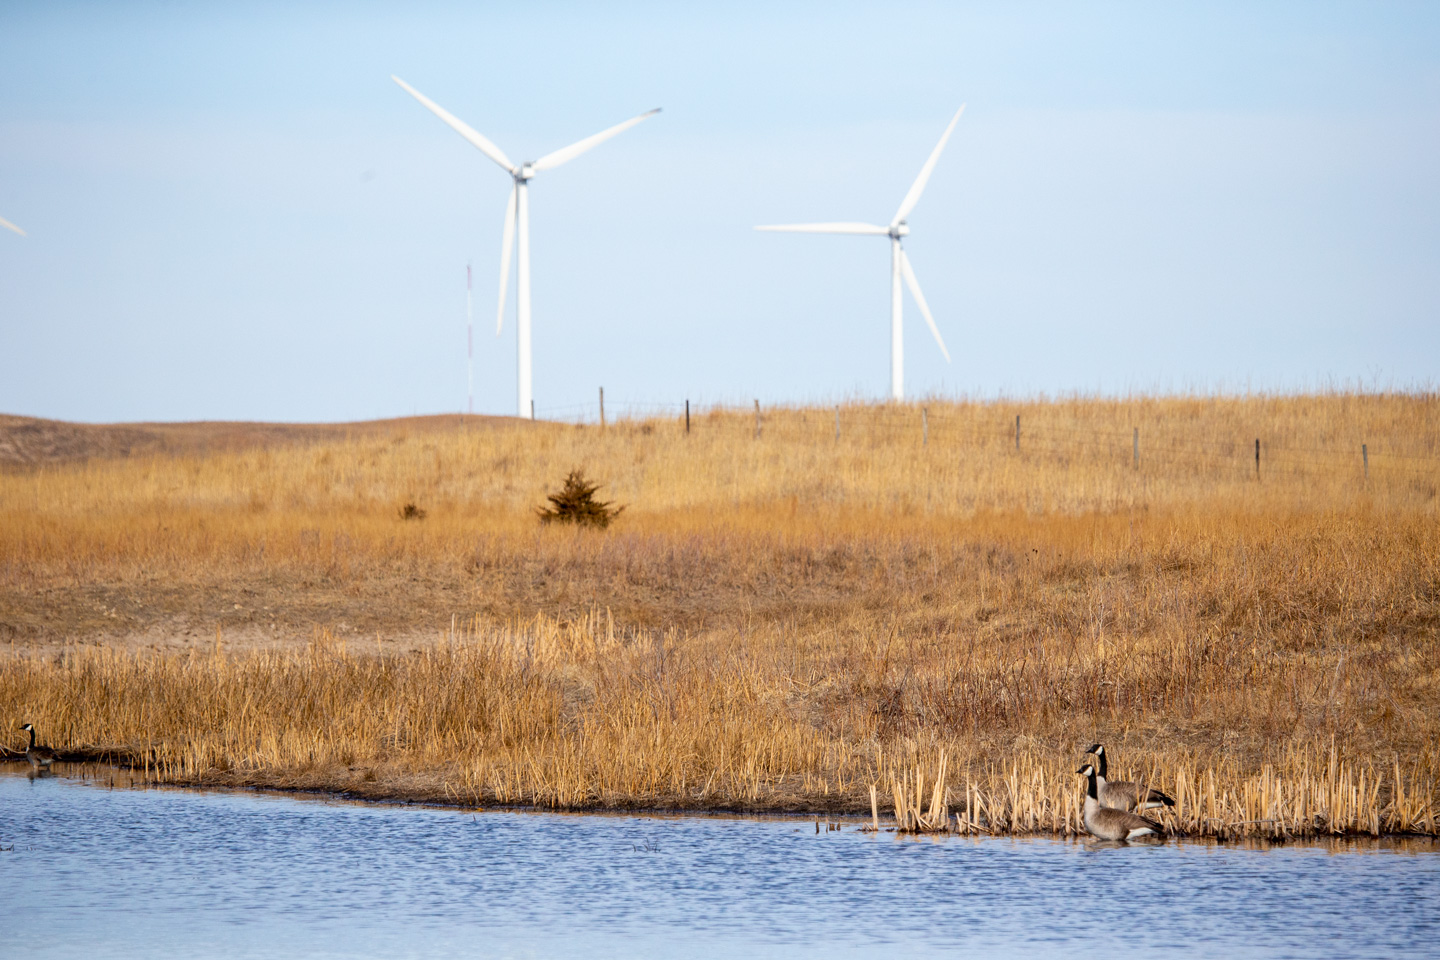 Two geese at the edge of a pond, wind turbines in the background.